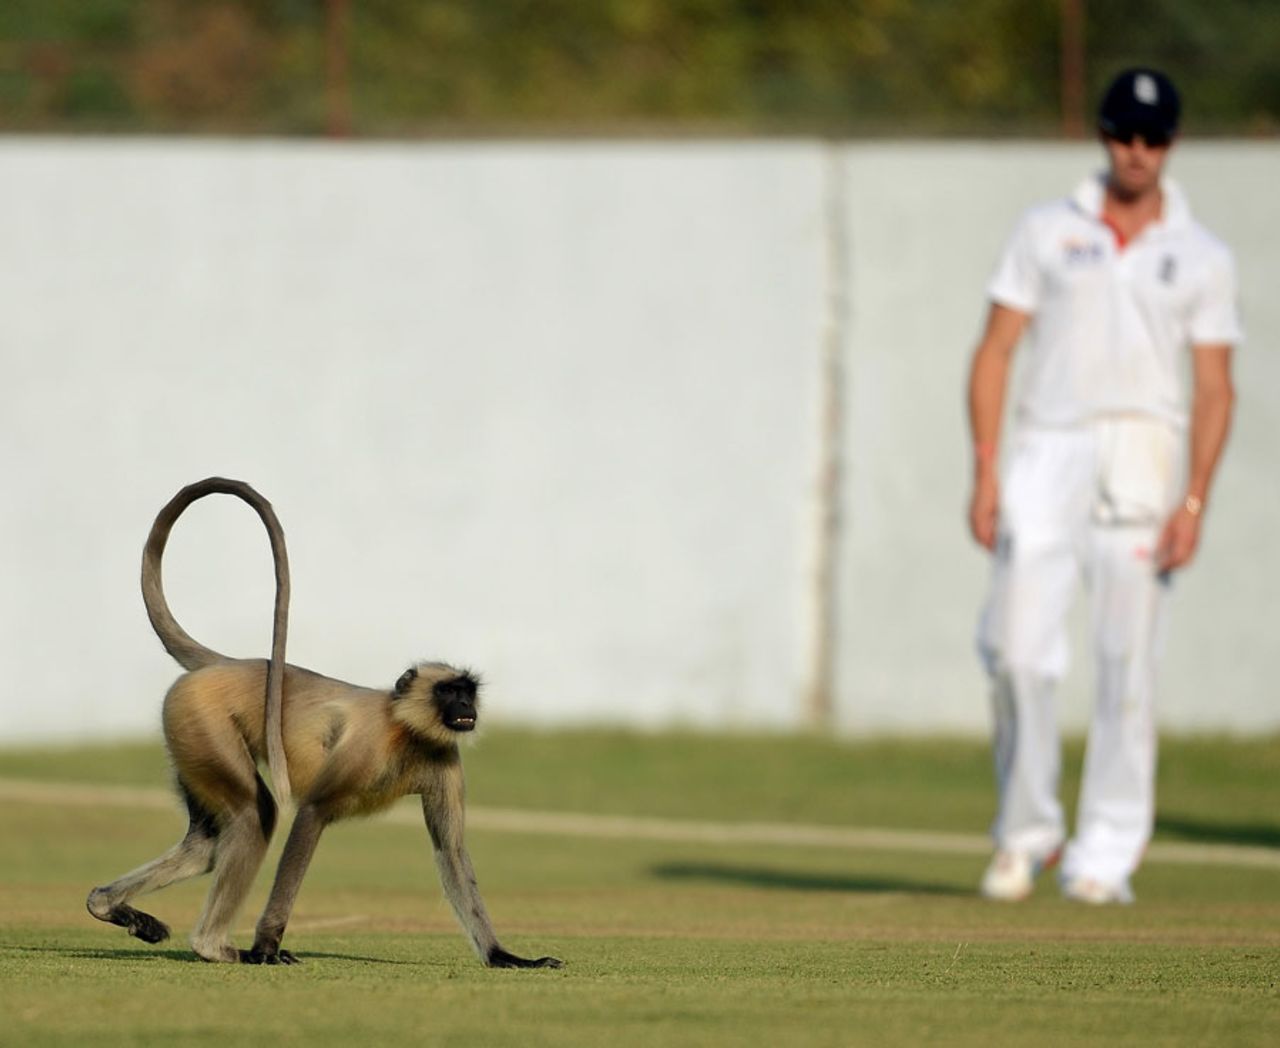 A keen spectator invades the field on day two, Haryana v England XI, tour match, Ahmedabad, 2nd day, November 9, 2012